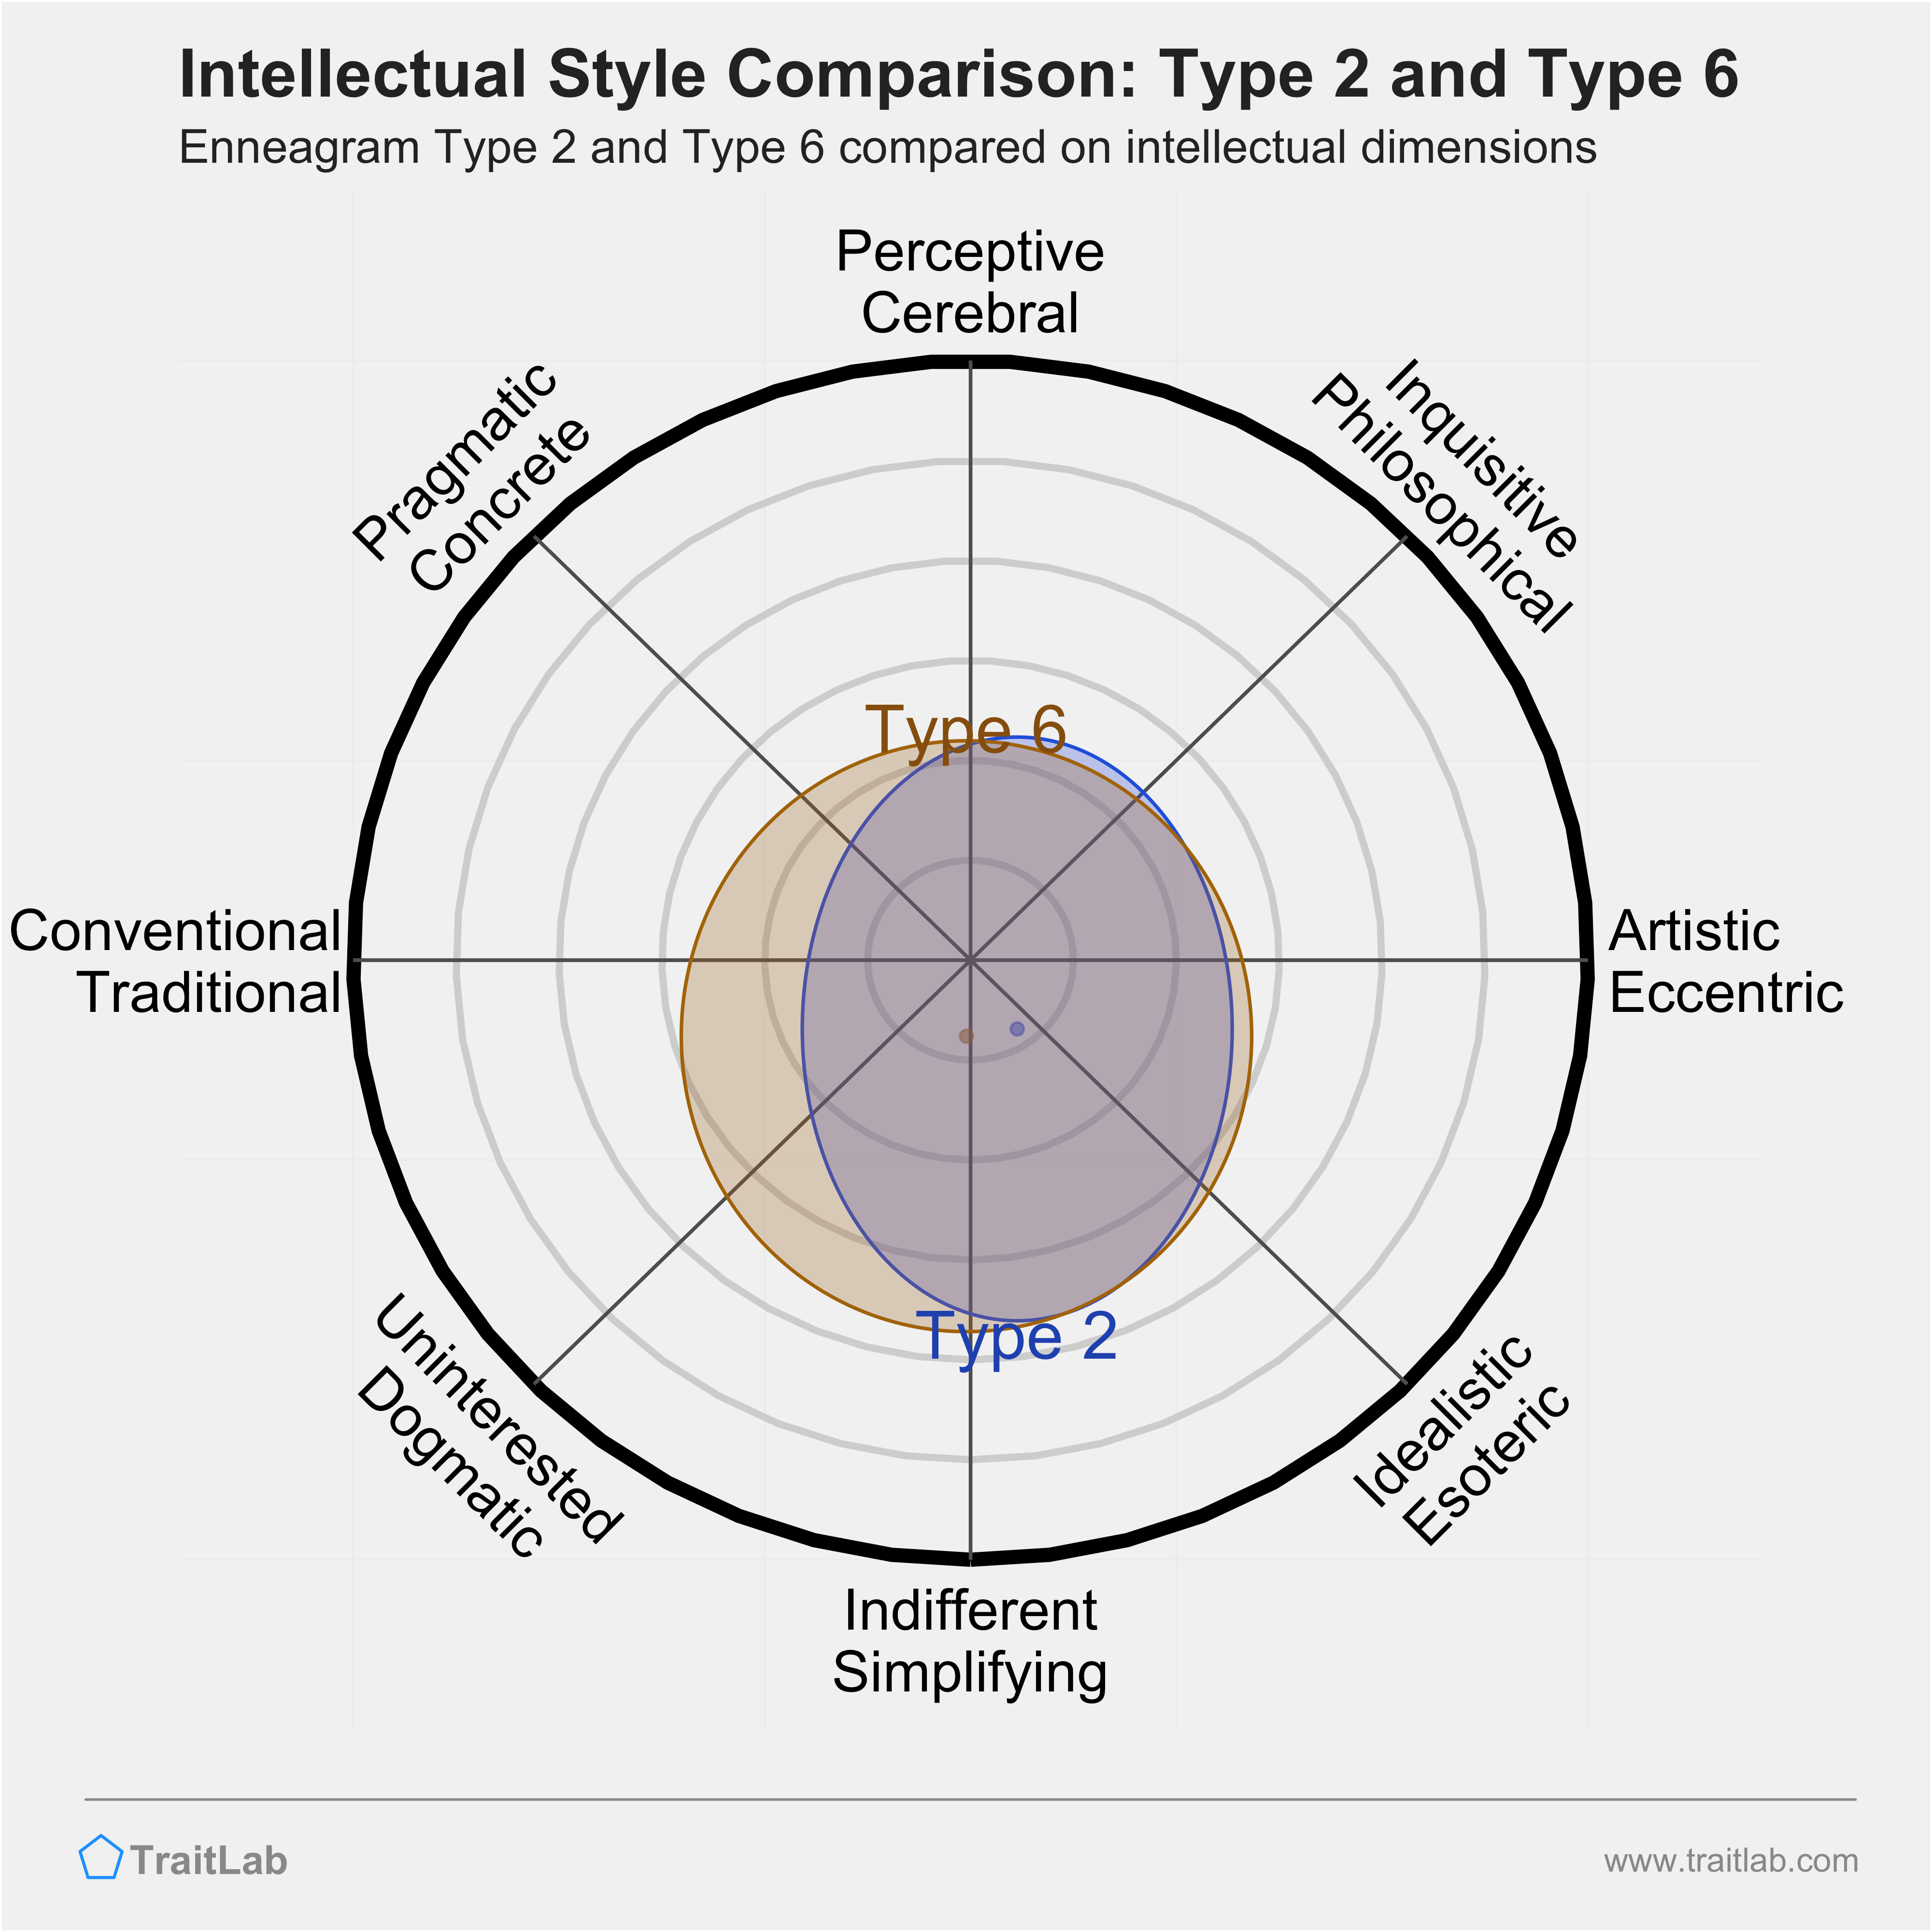 Type 2 and Type 6 comparison across intellectual dimensions